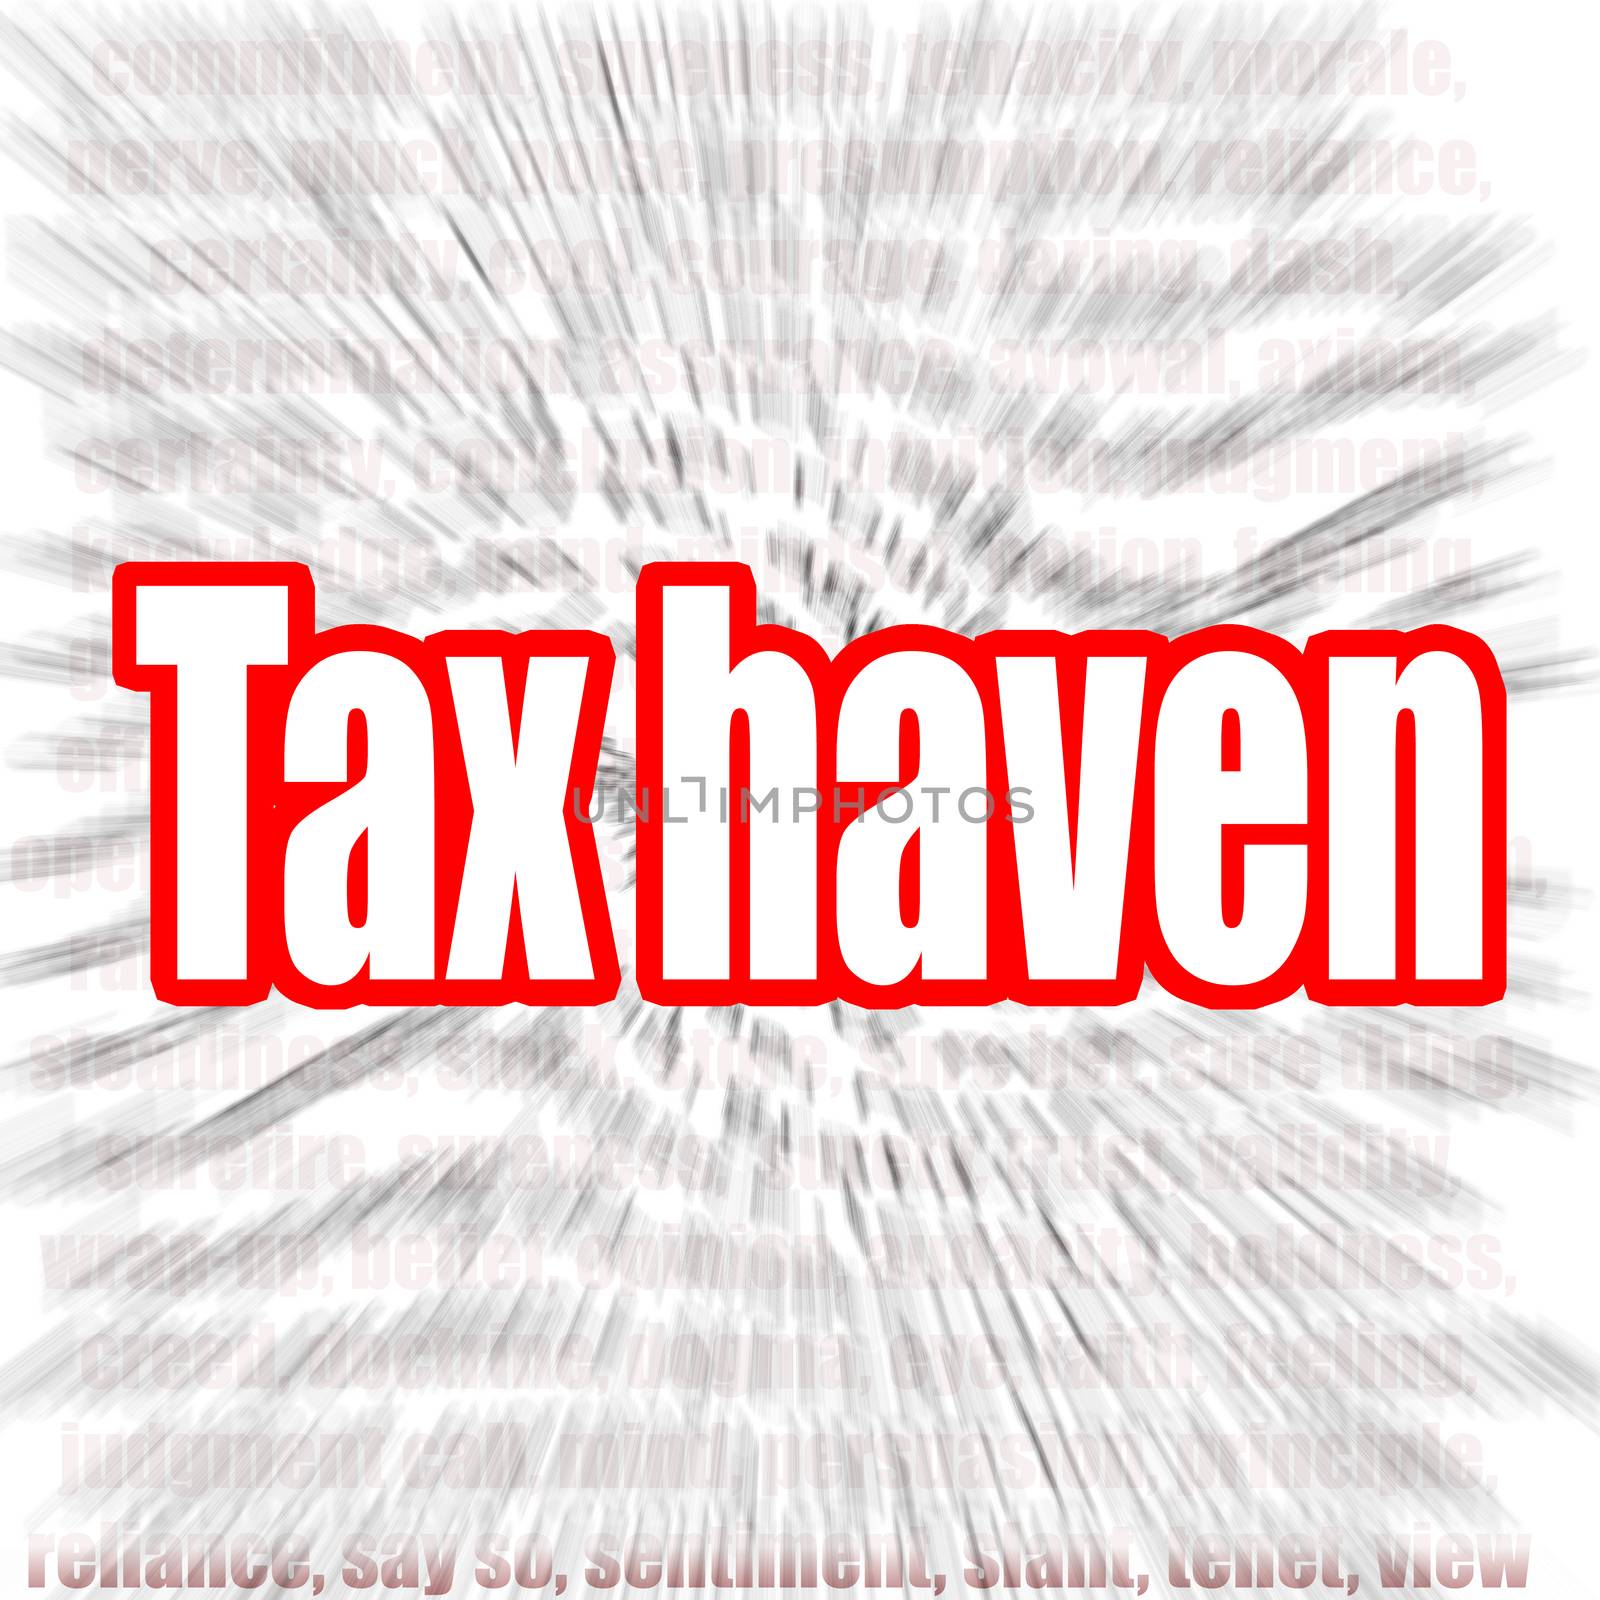 Tax haven word with zoom in effect as background, 3D rendering